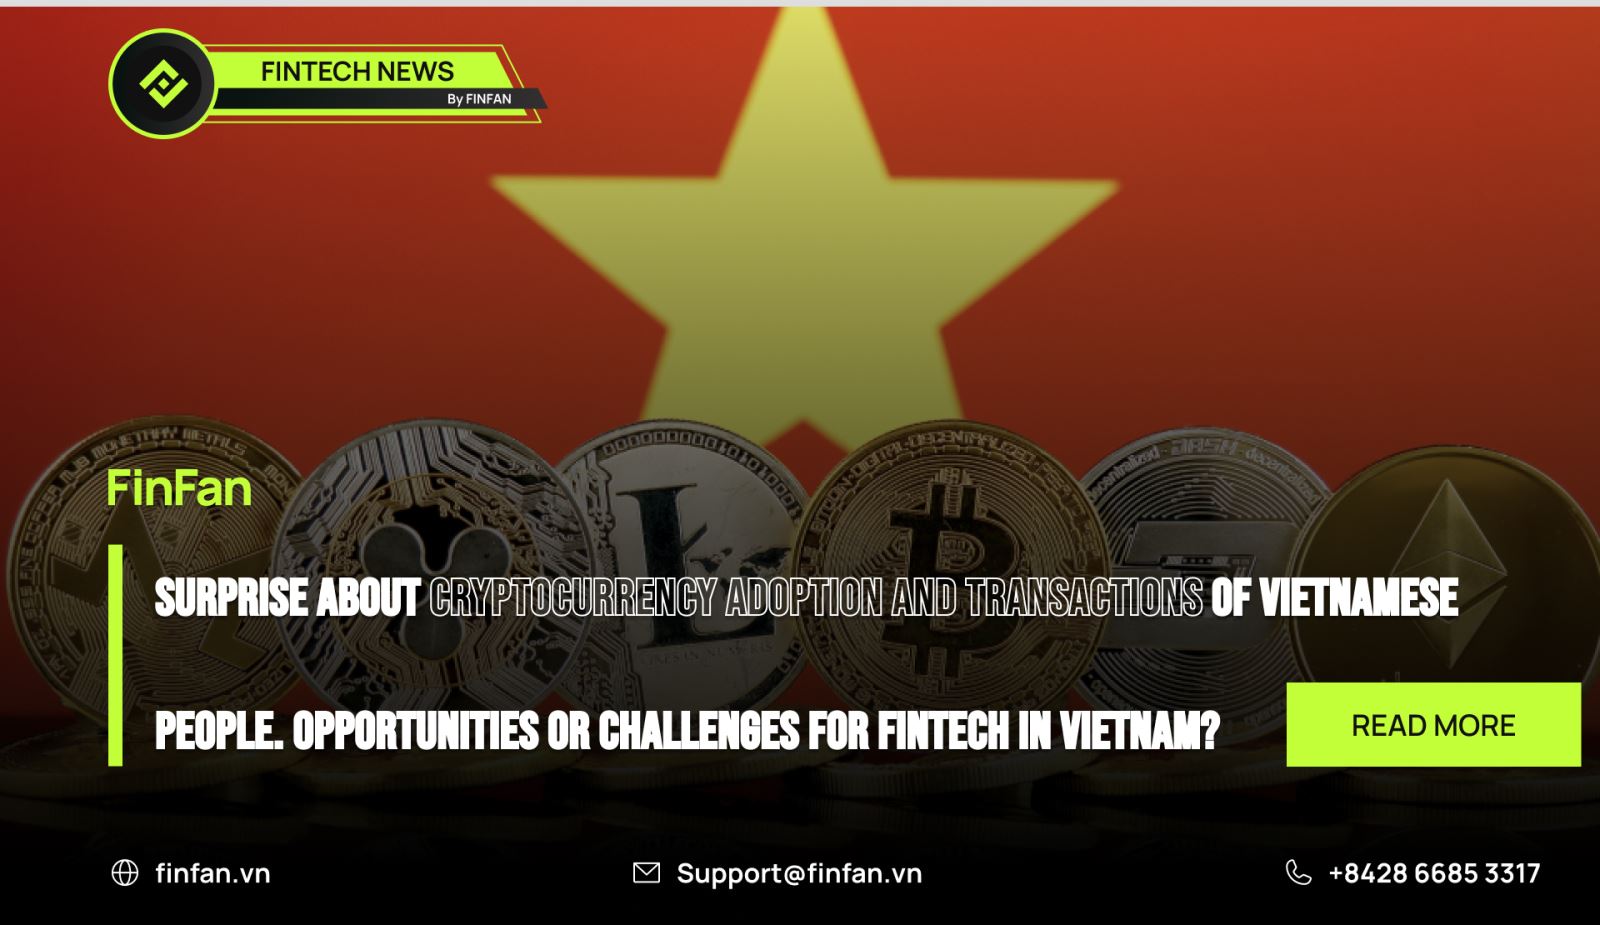 Surprise about cryptocurrency adoption and transactions of Vietnamese people. Opportunities or challenges for fintech in Vietnam?